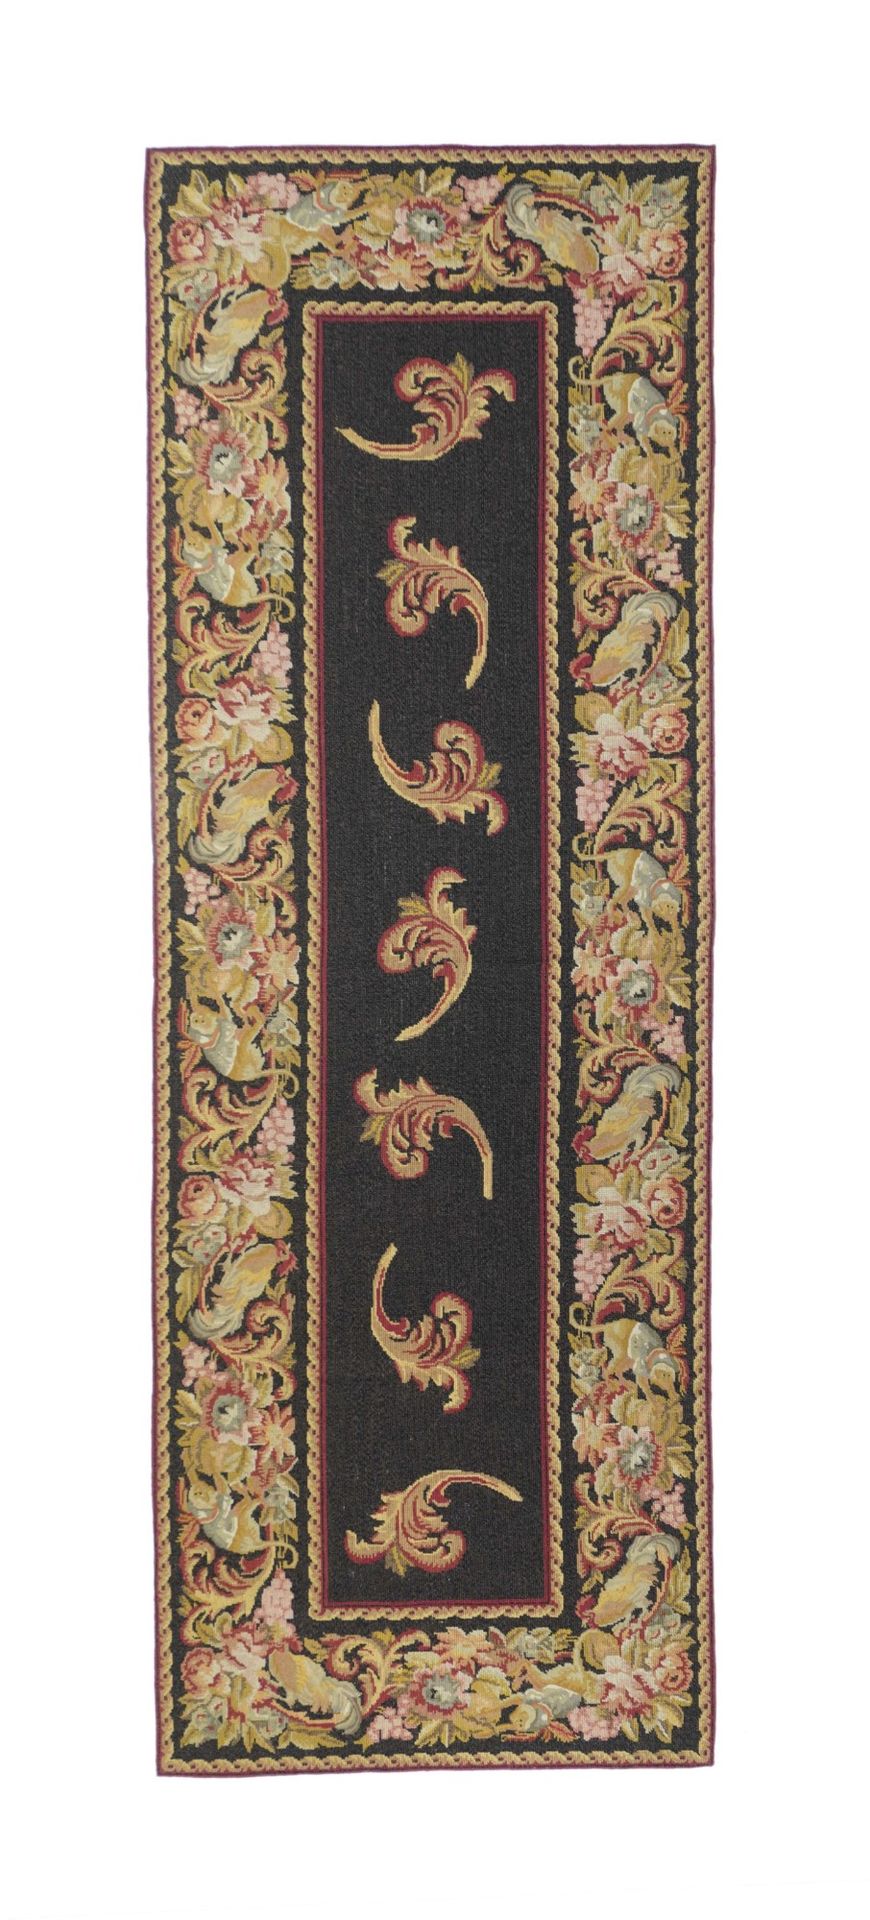 Null Needle Point Rug, 2'8" x 8' ( 0.81 x 2.44 M )